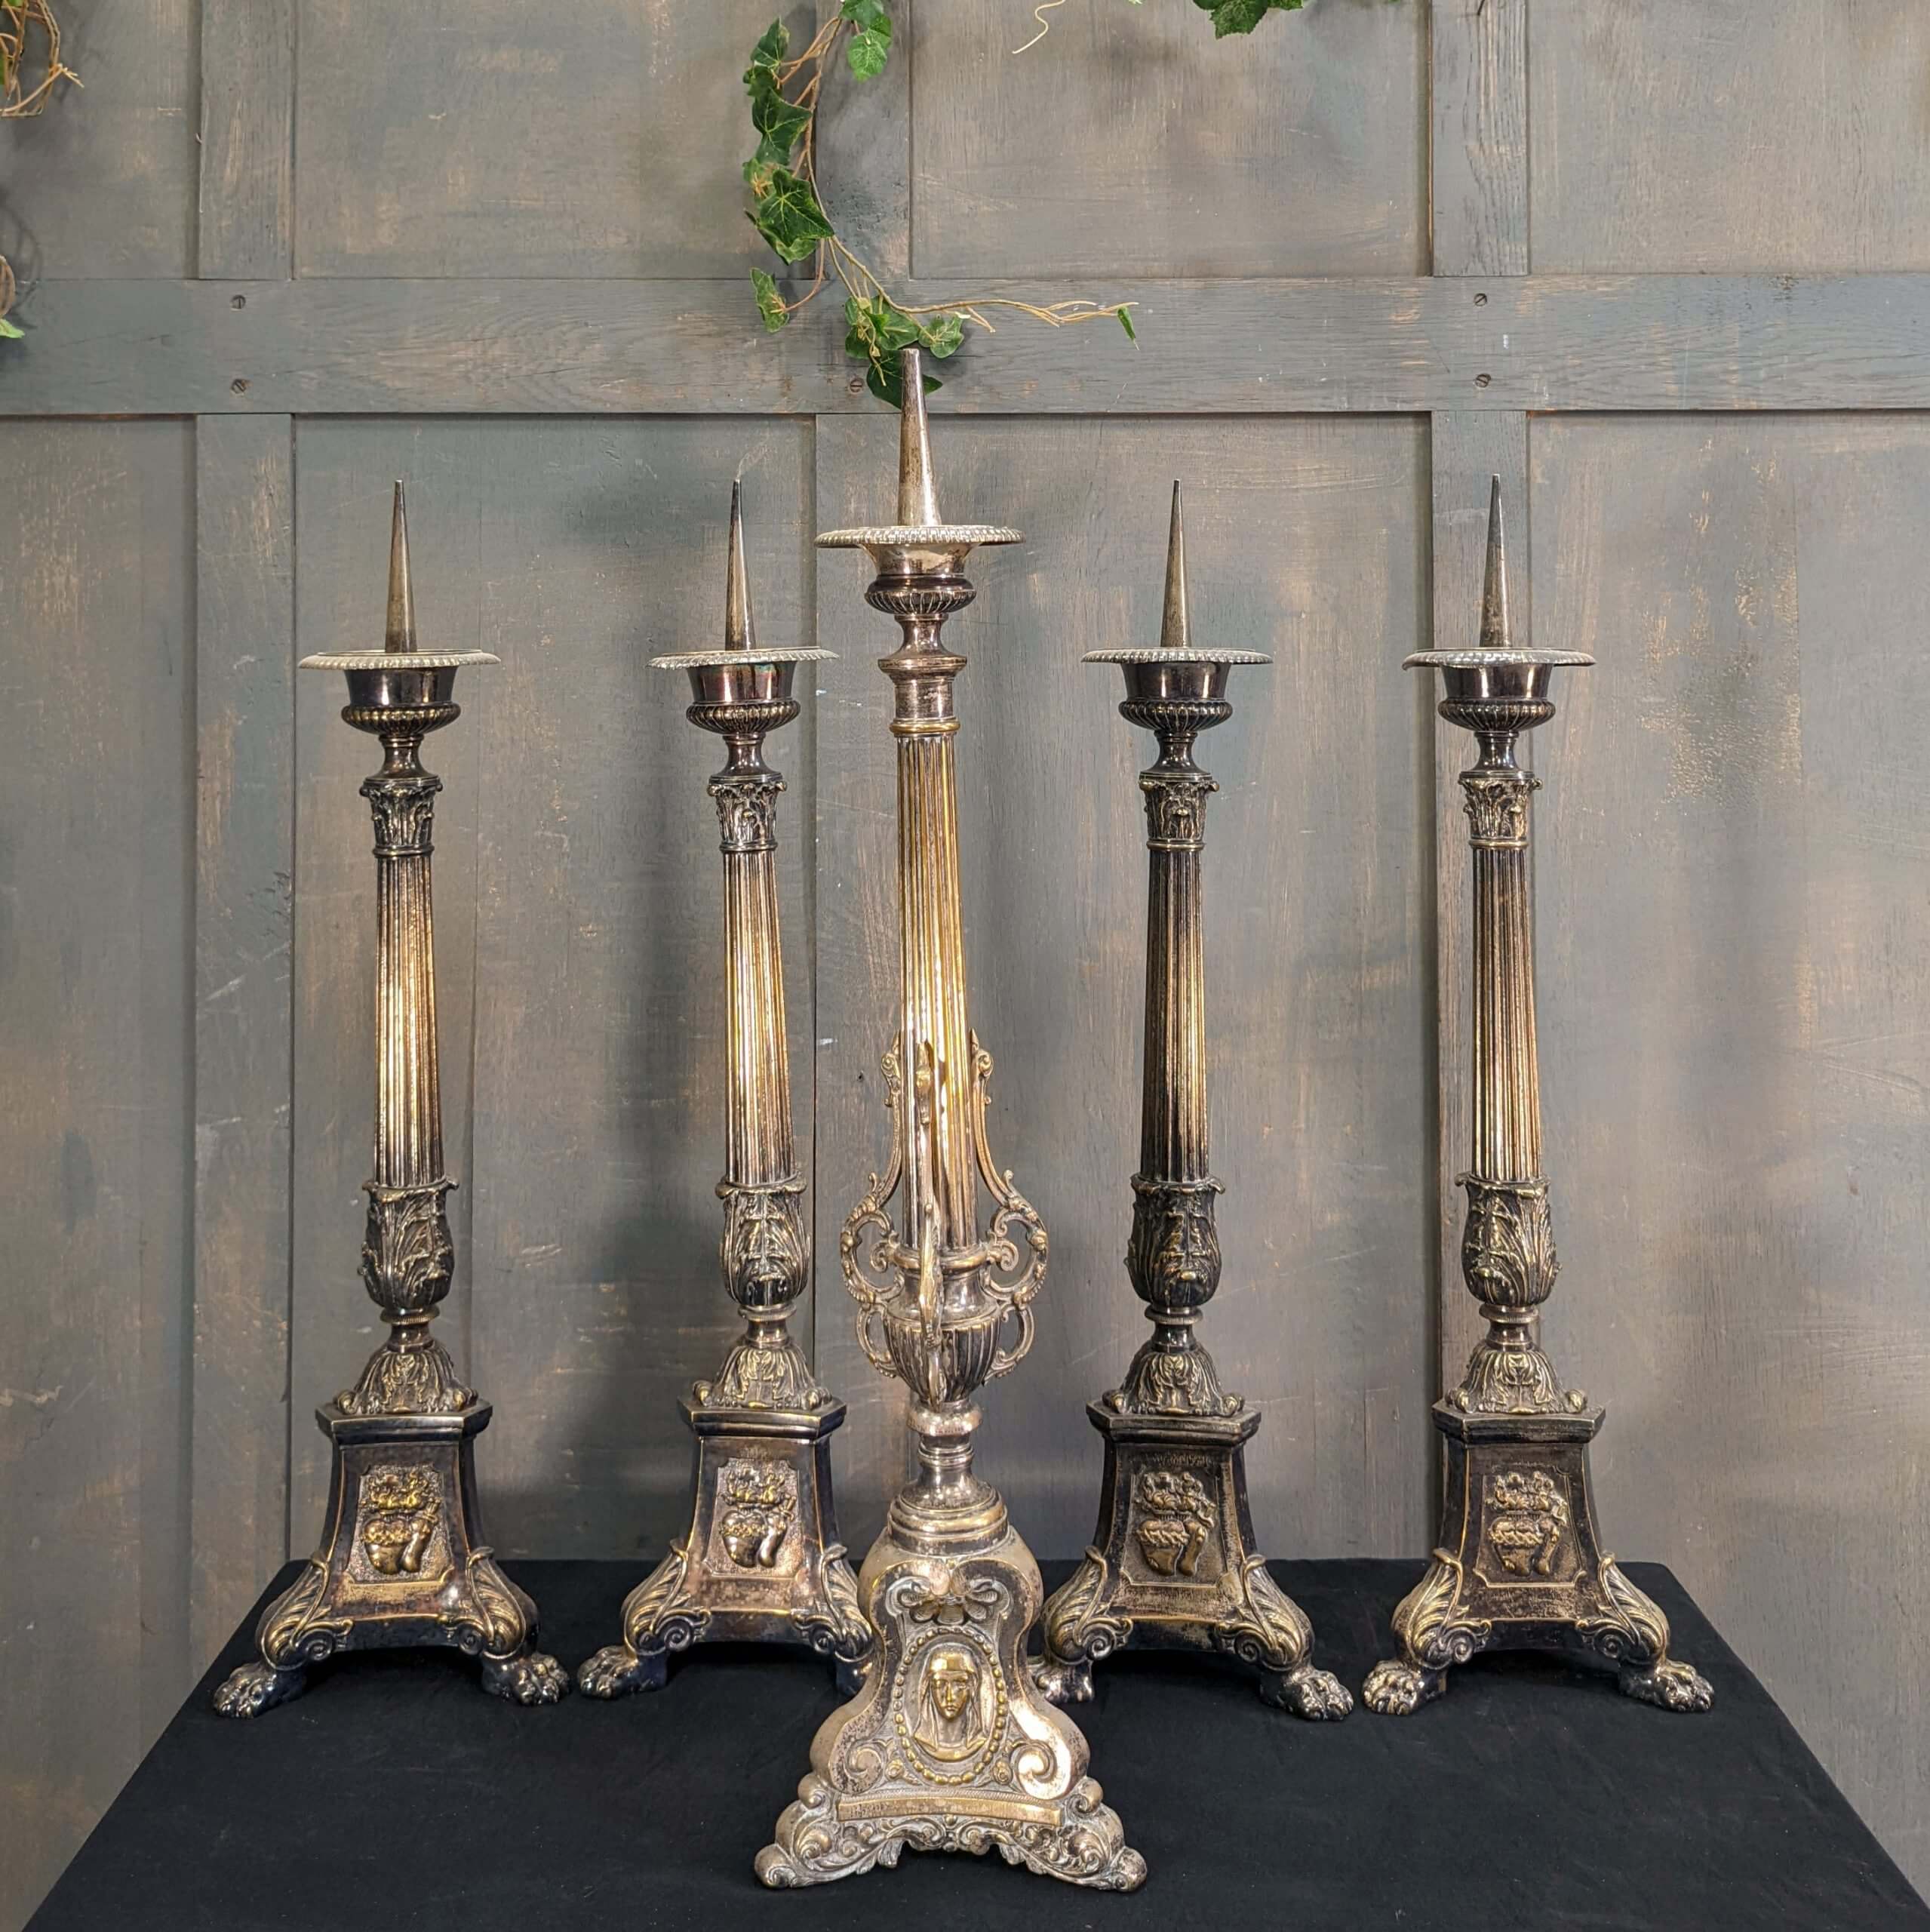 Large Antique French Church Altar Set of Four Pricket Candlesticks with  Fifth Central Stick (SOLD) - Antique Church Furnishings